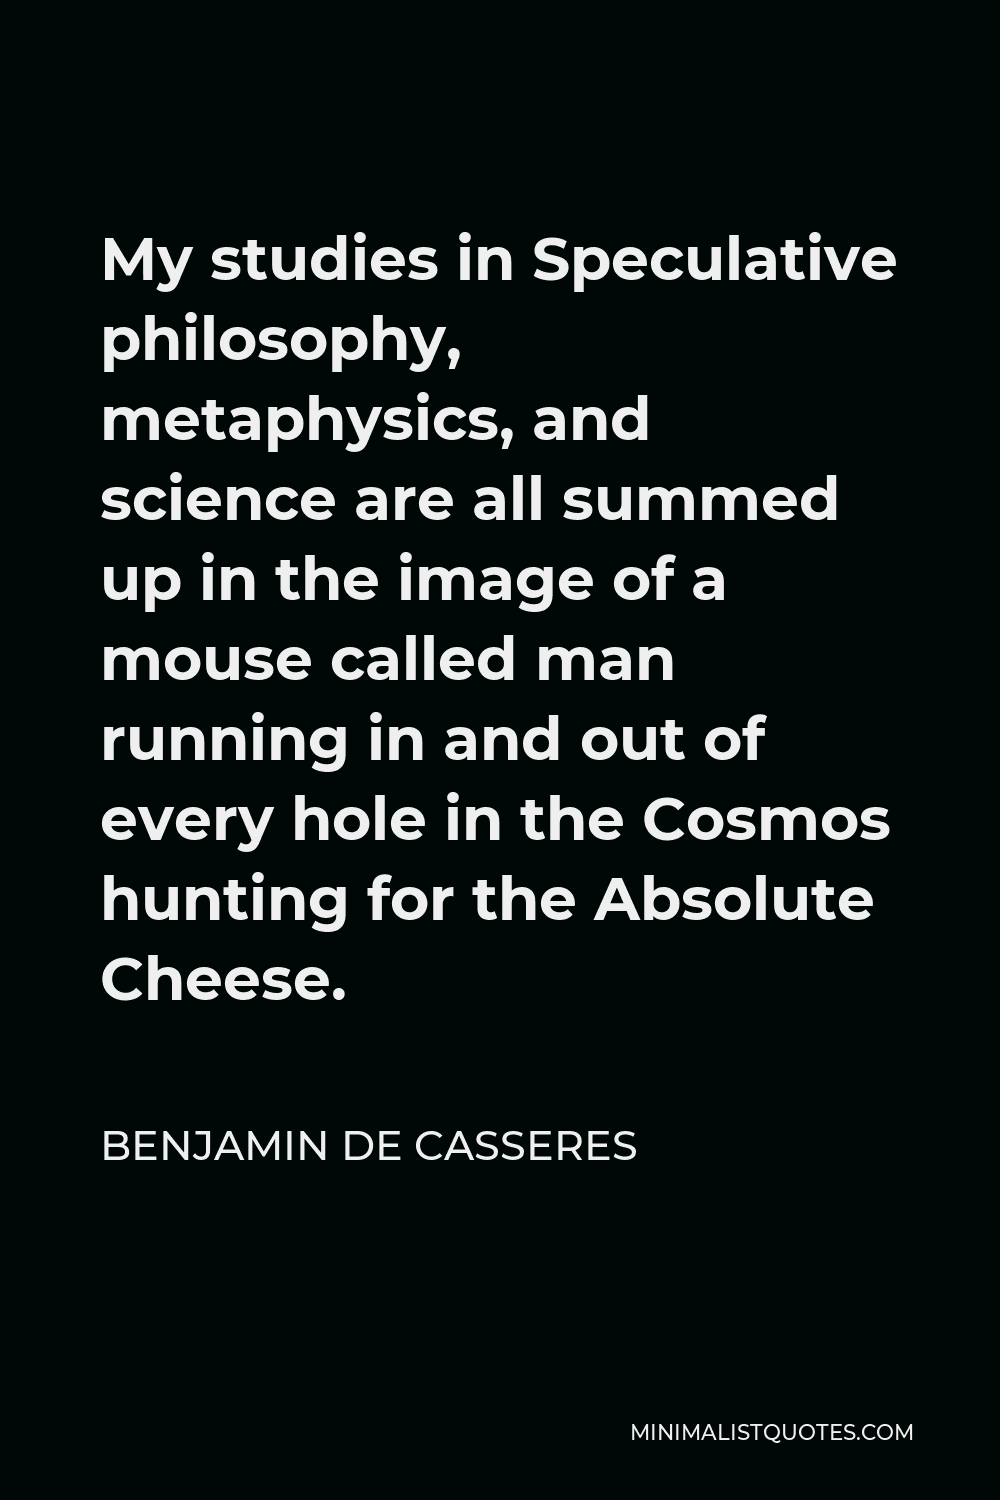 Benjamin De Casseres Quote - My studies in Speculative philosophy, metaphysics, and science are all summed up in the image of a mouse called man running in and out of every hole in the Cosmos hunting for the Absolute Cheese.